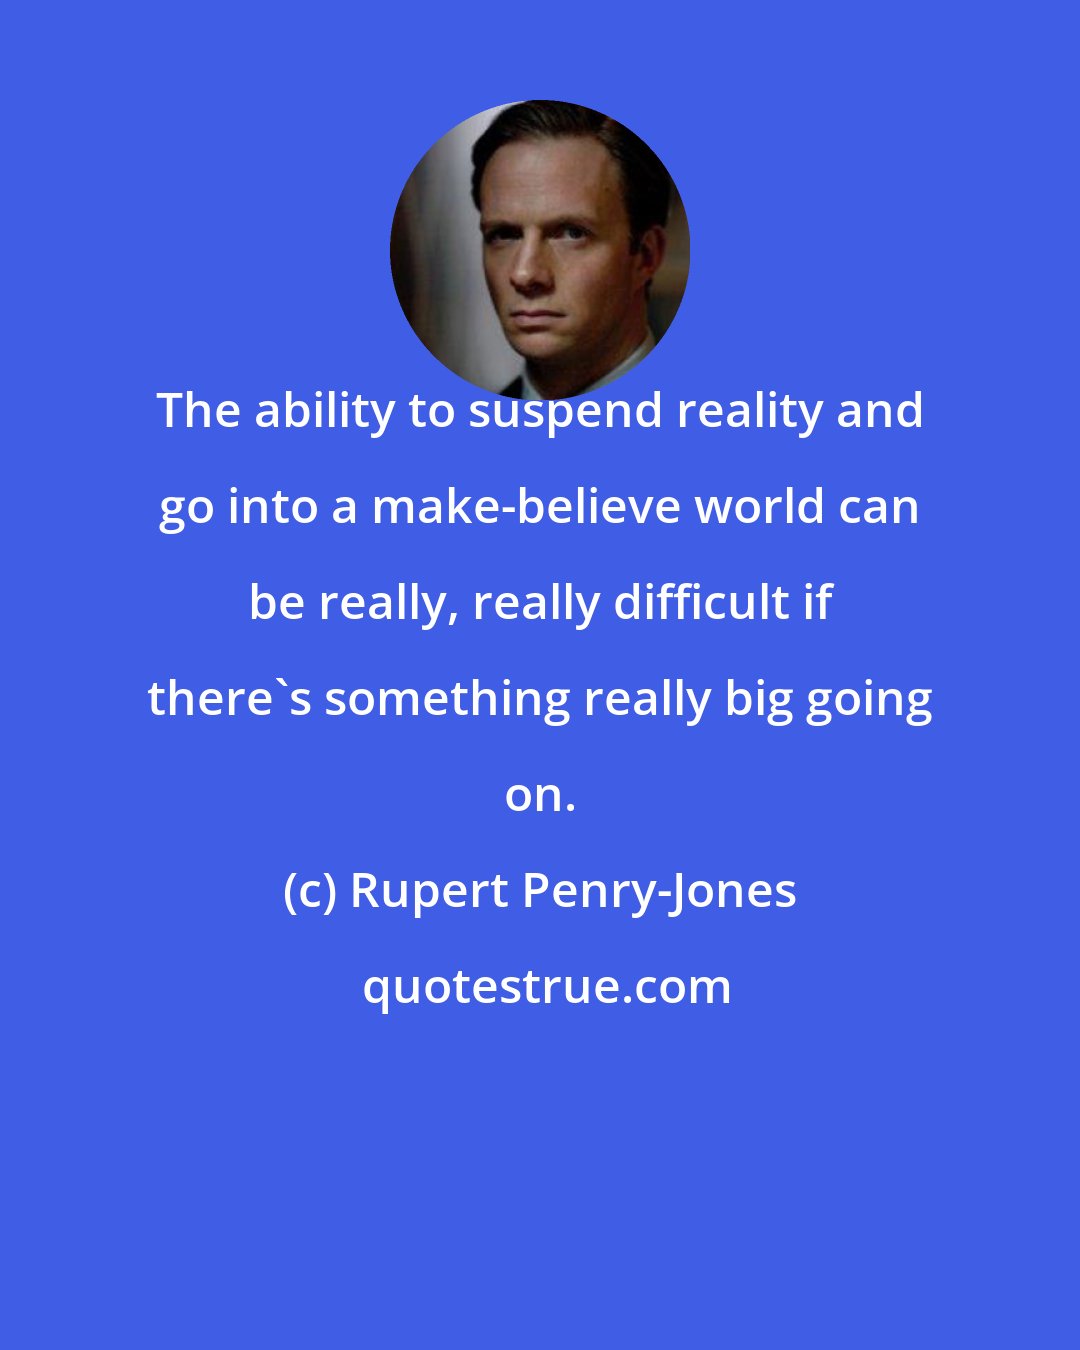 Rupert Penry-Jones: The ability to suspend reality and go into a make-believe world can be really, really difficult if there's something really big going on.